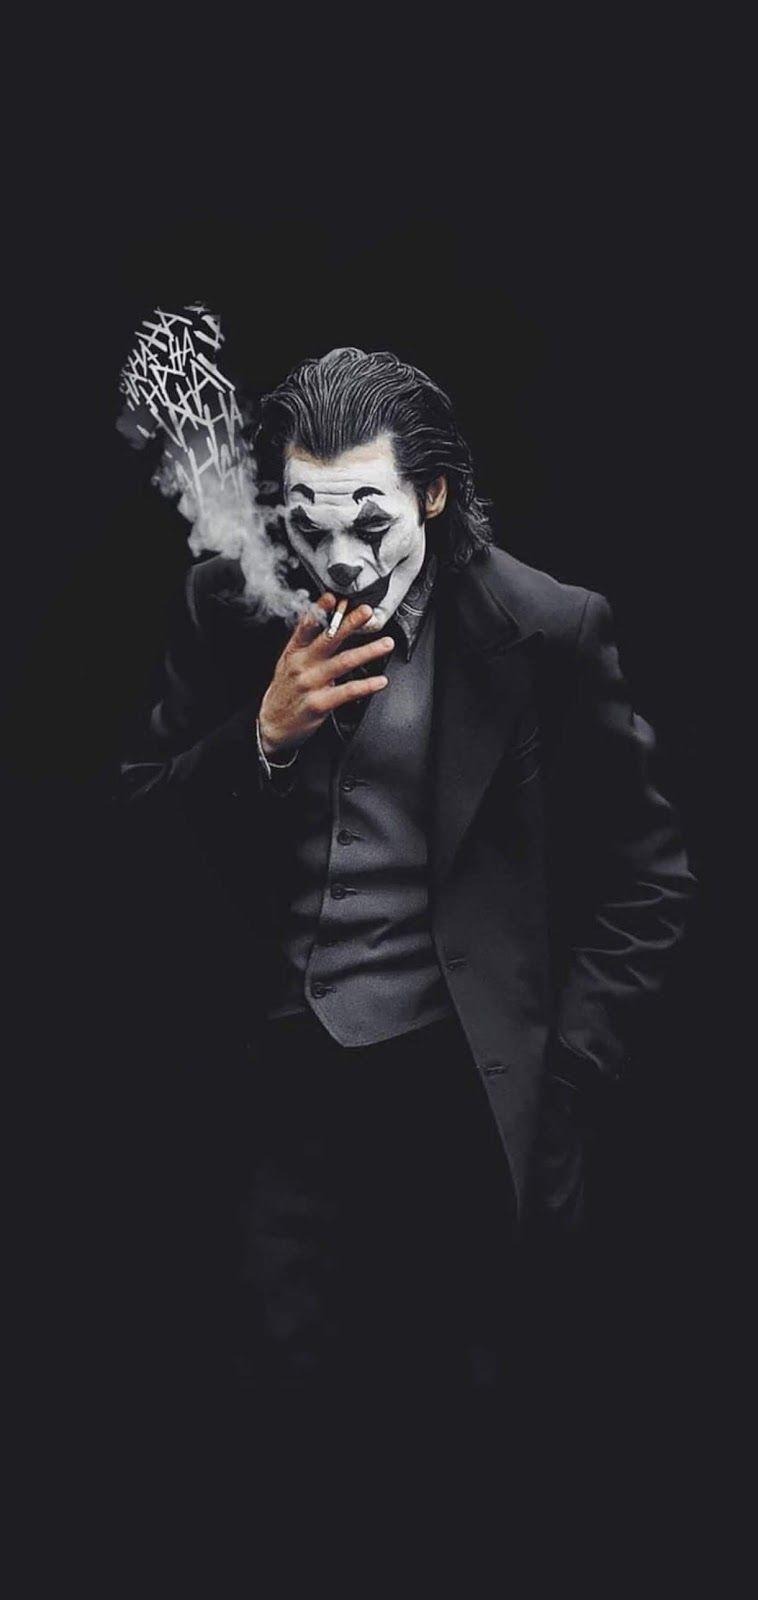 Download Joker Fan Edited 2019 Mobile Wallpaper for your Android